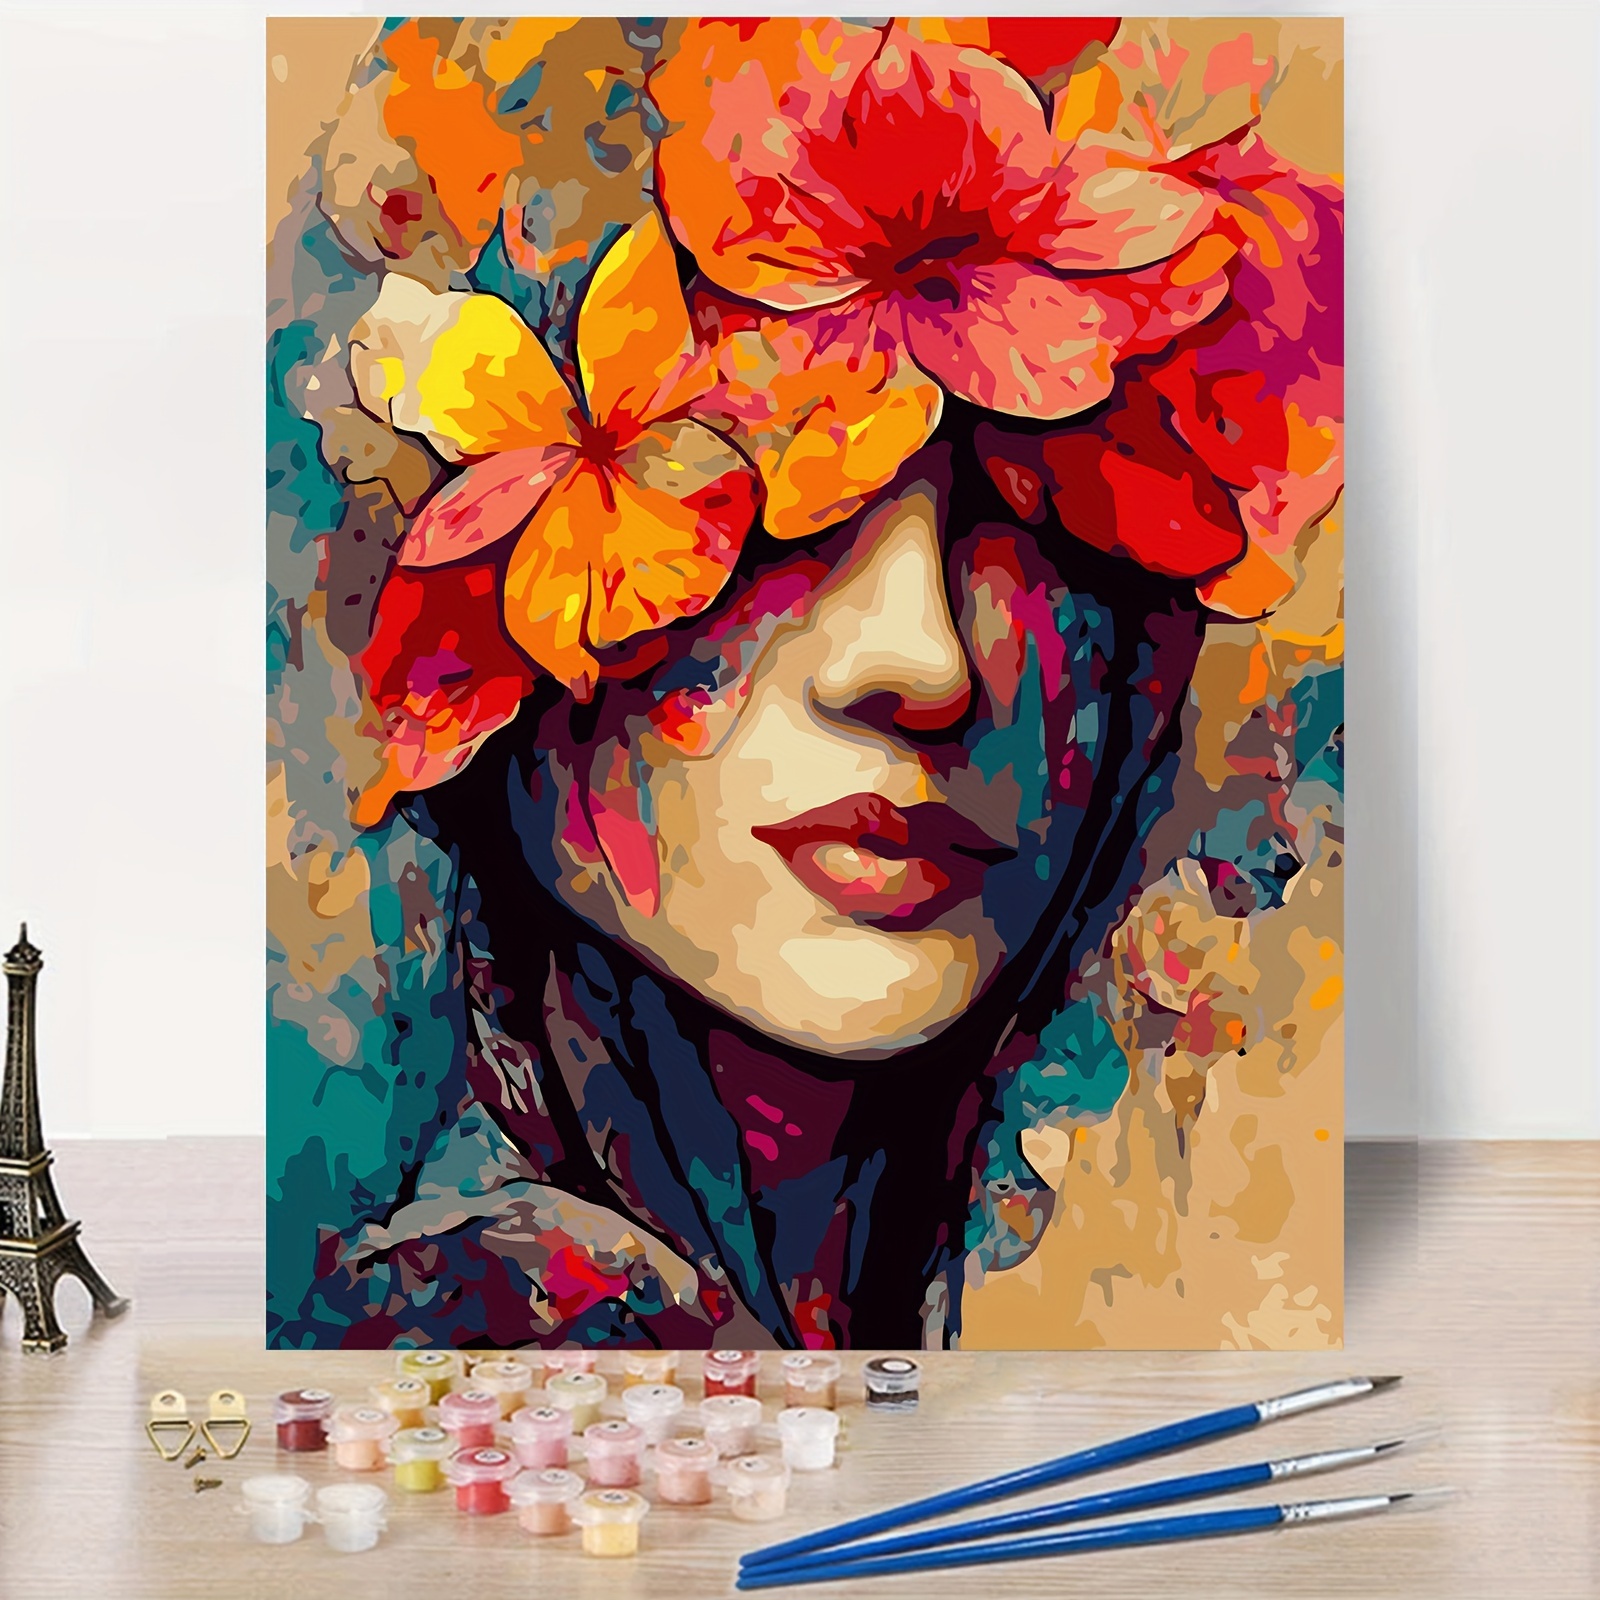 PAINT by NUMBERS Kit for Adults Easy DIY Art , Beautiful Woman Abstract  Portrait, Adults Acrylic Painting Set Home Wall Decor Gift 